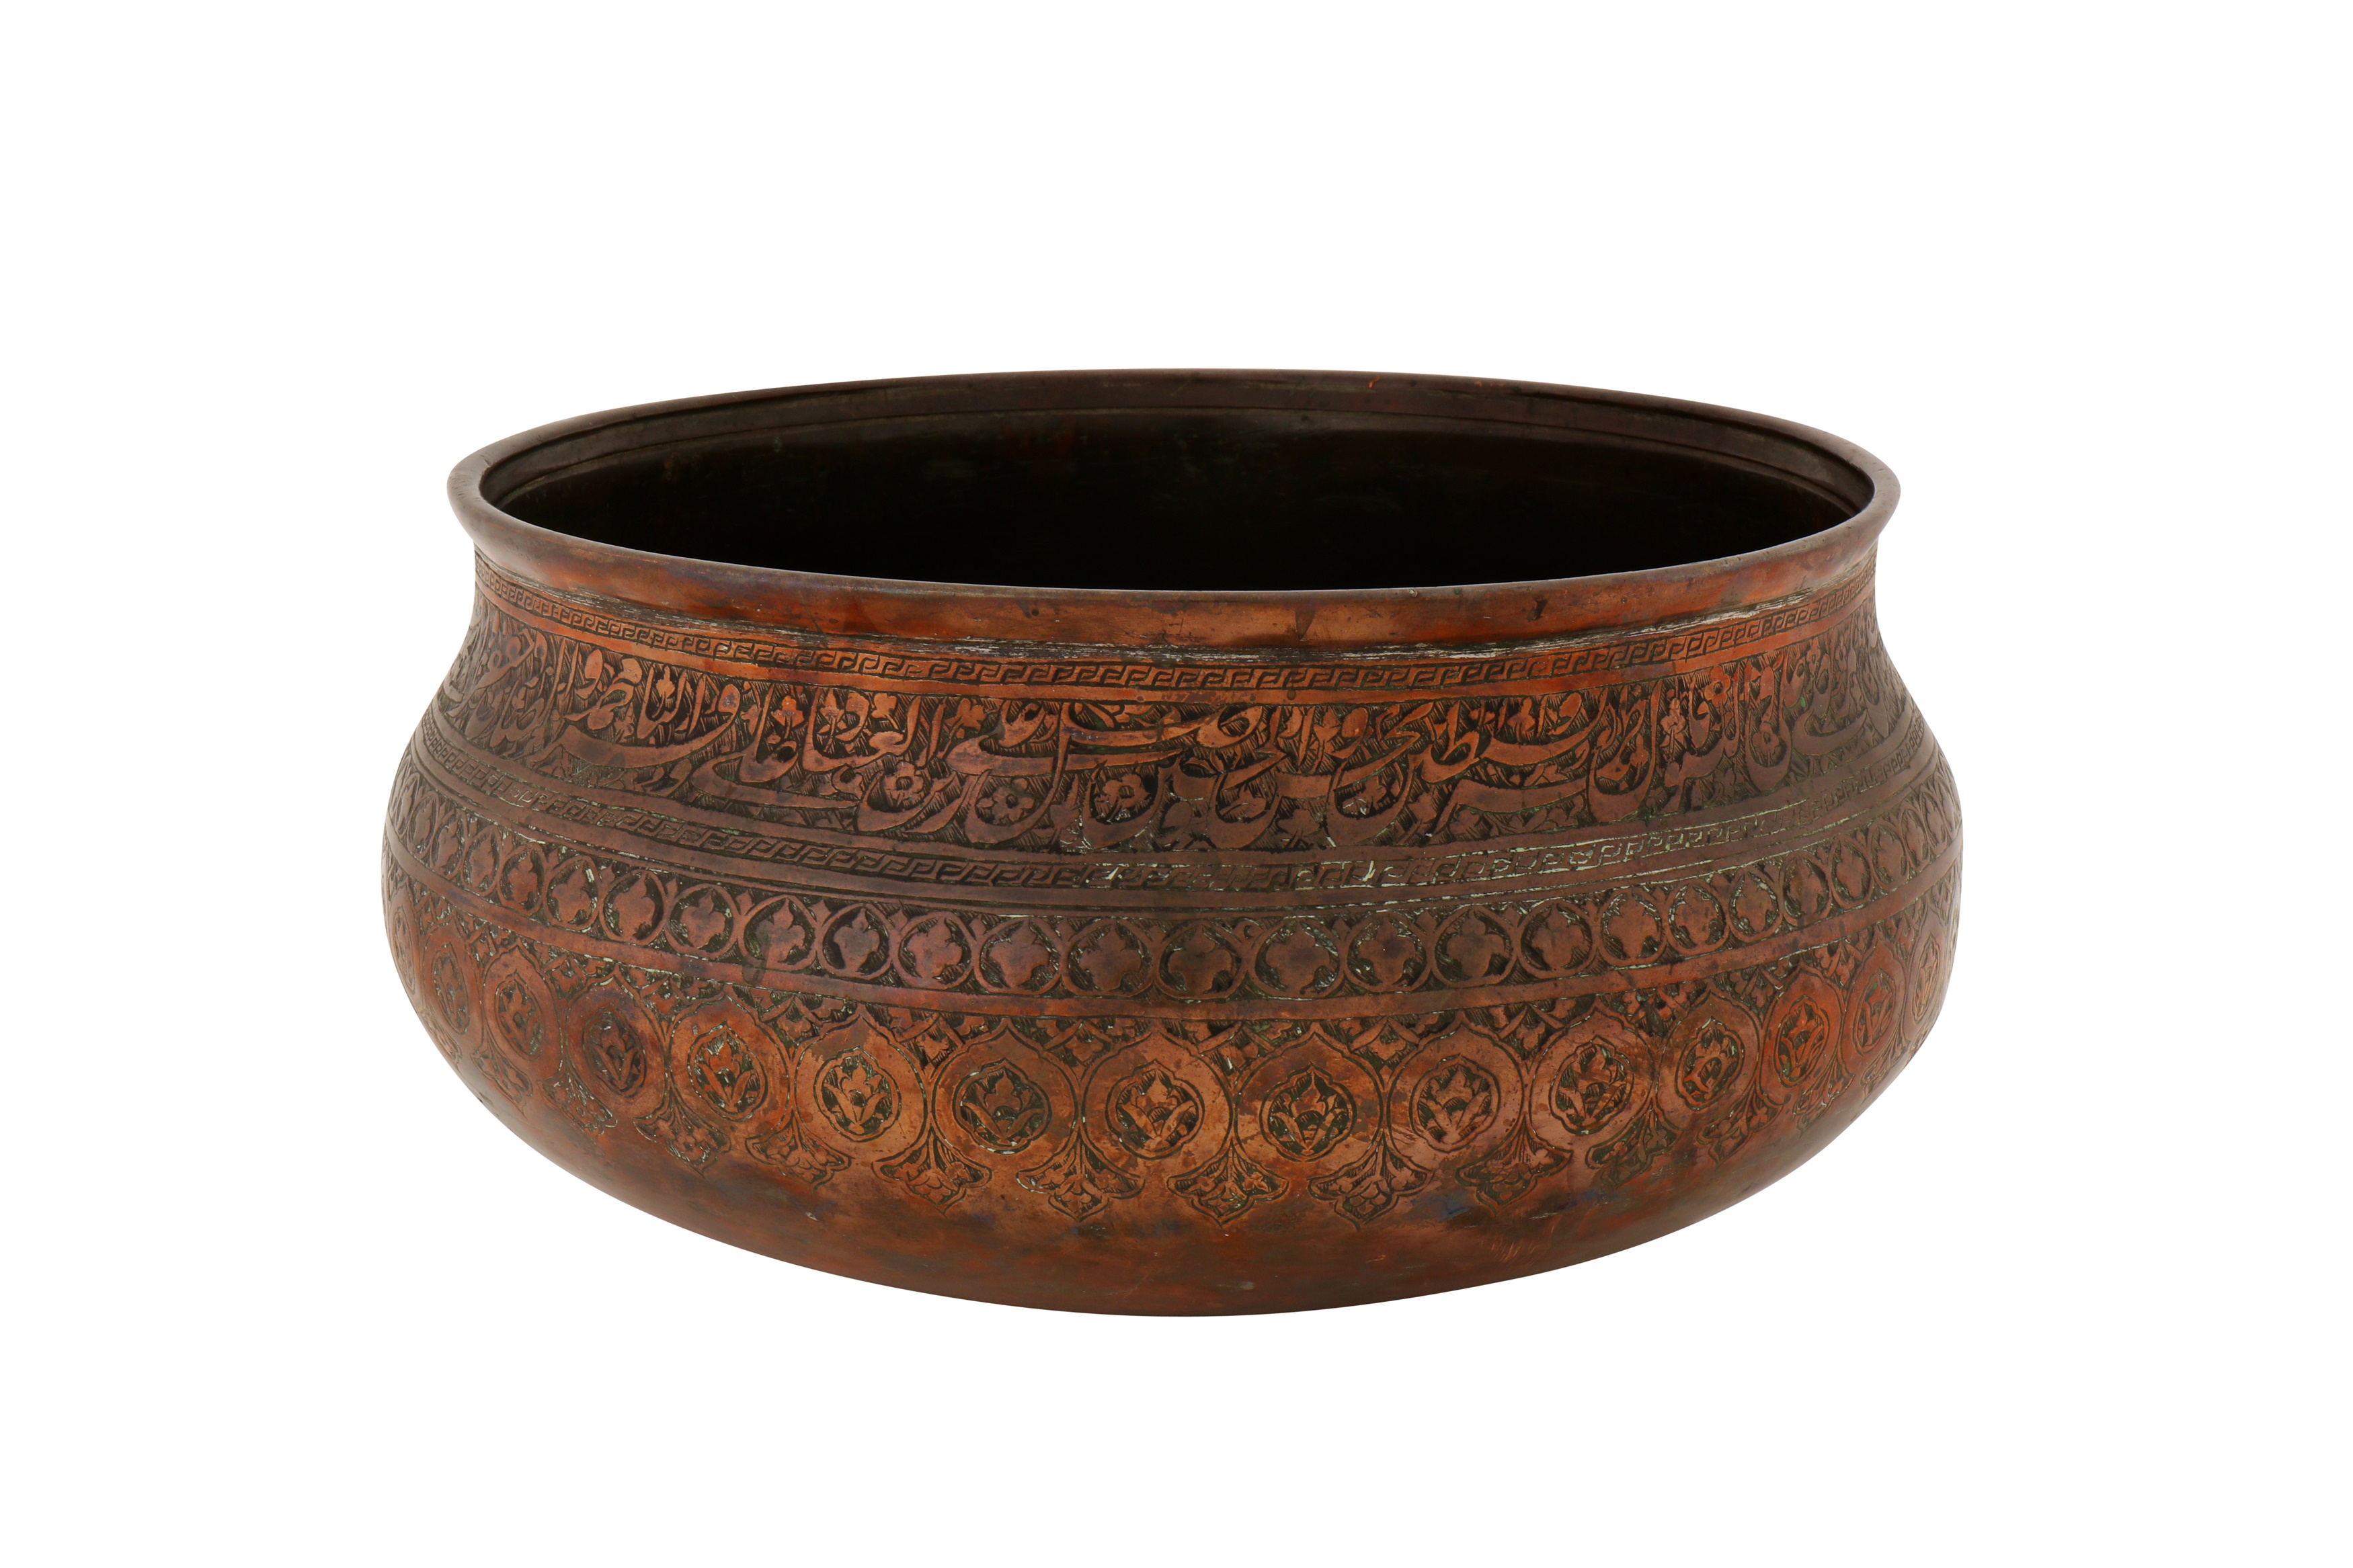 A 17TH CENTURY SAFAVID ENGRAVED TINNED COPPER TAS BOWL WITH THE NAMES OF THE 12 SHI'A IMAMS - Image 4 of 4